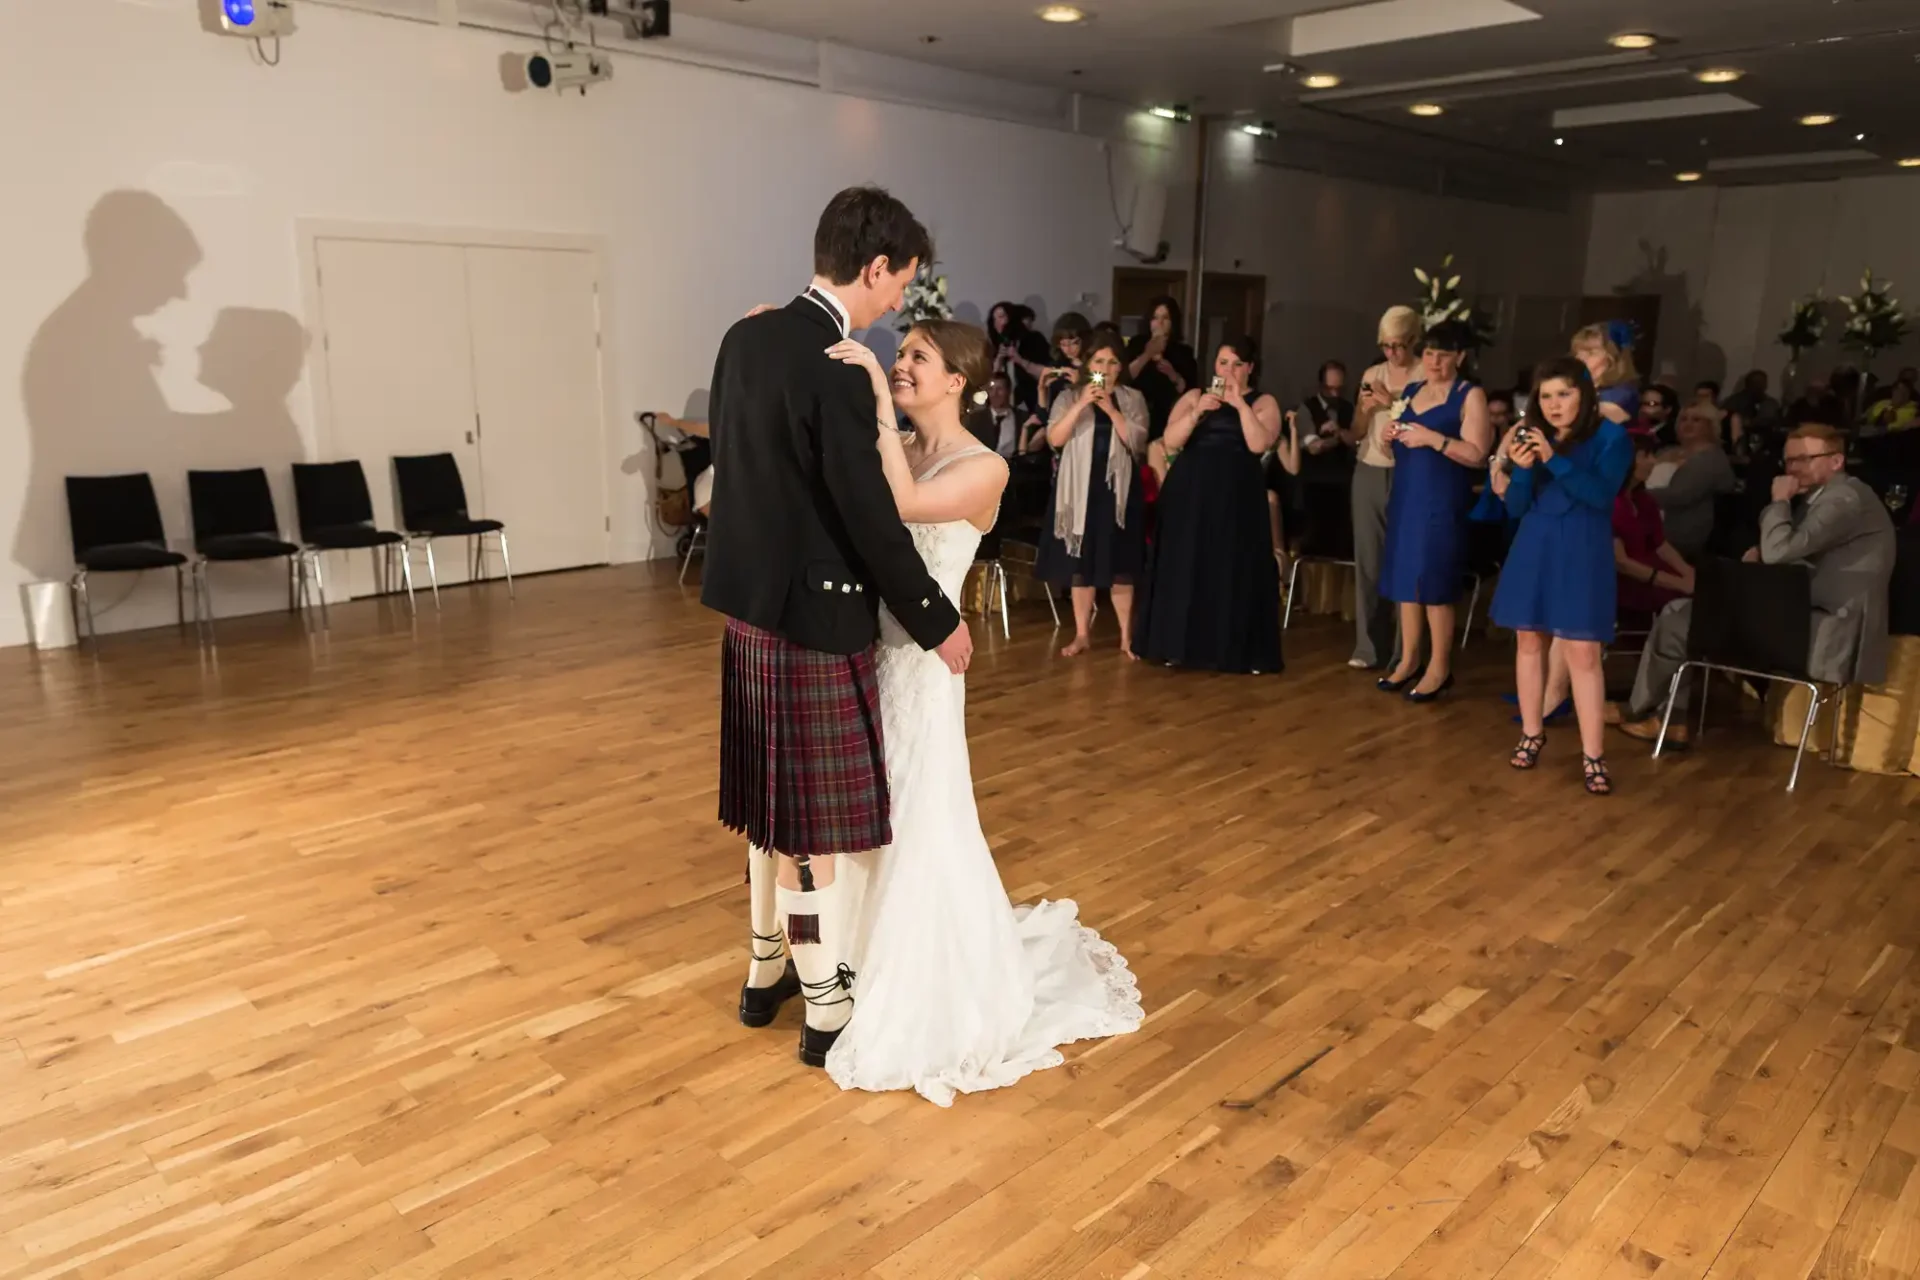 A bride and groom share their first dance at a wedding reception, surrounded by guests watching and taking photos. the groom wears a kilt and the bride is in a white dress.